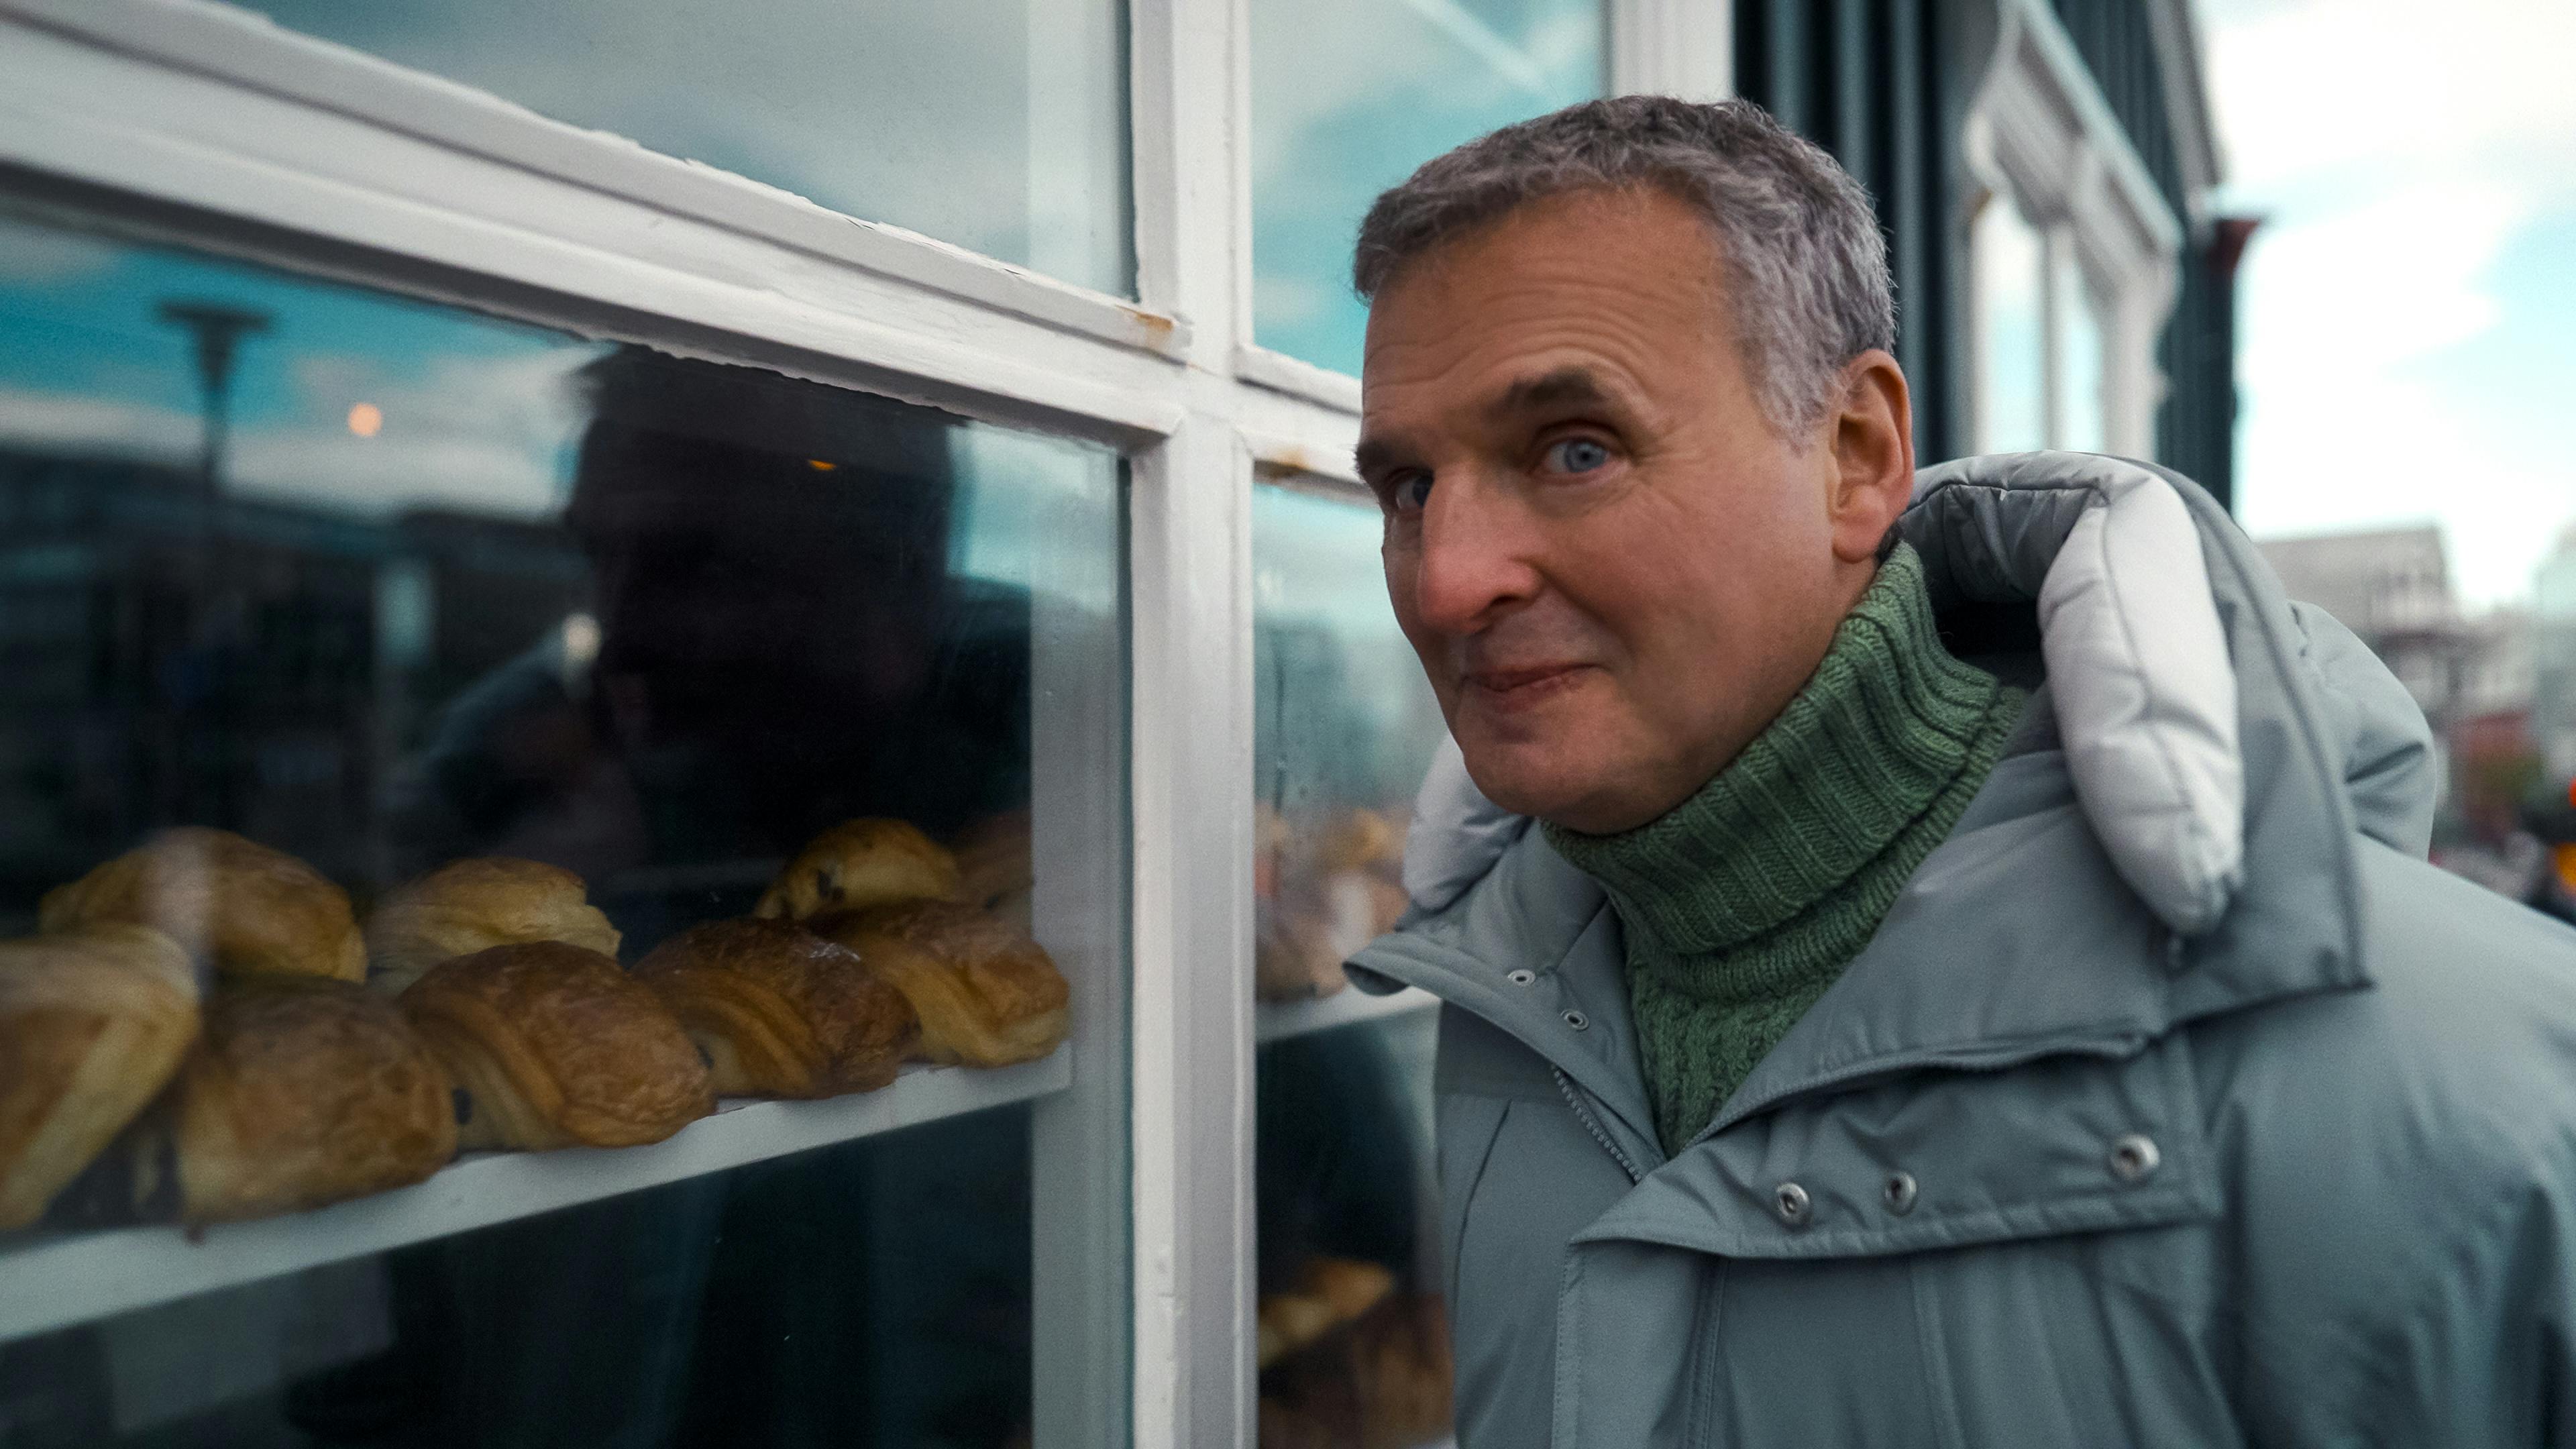 Philip Rosenthal of "Somebody Feed Phil" looking through the bakery window of Brauð & Co. in Reykjavík, Iceland. 